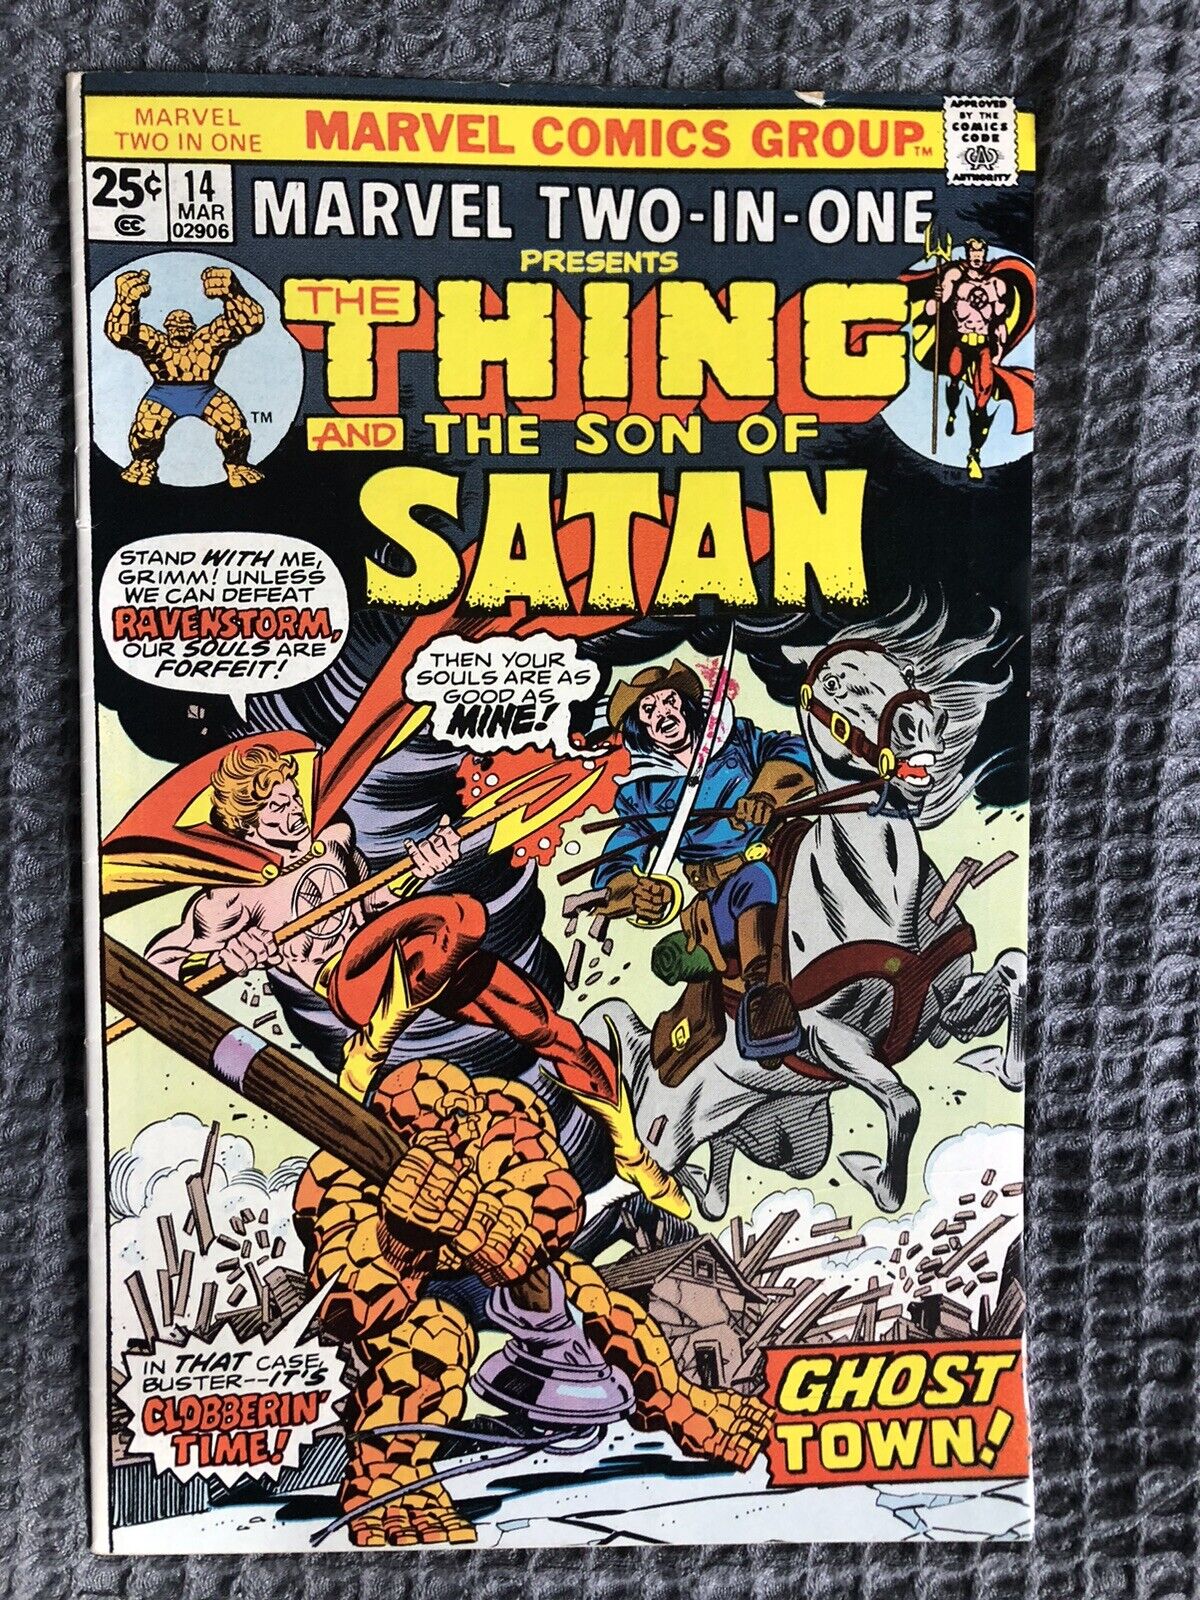 MARVEL TWO-IN-ONE #14 - MARCH 1976 - 6.5-7.0 Range  BRONZE AGE - SON OF SATAN